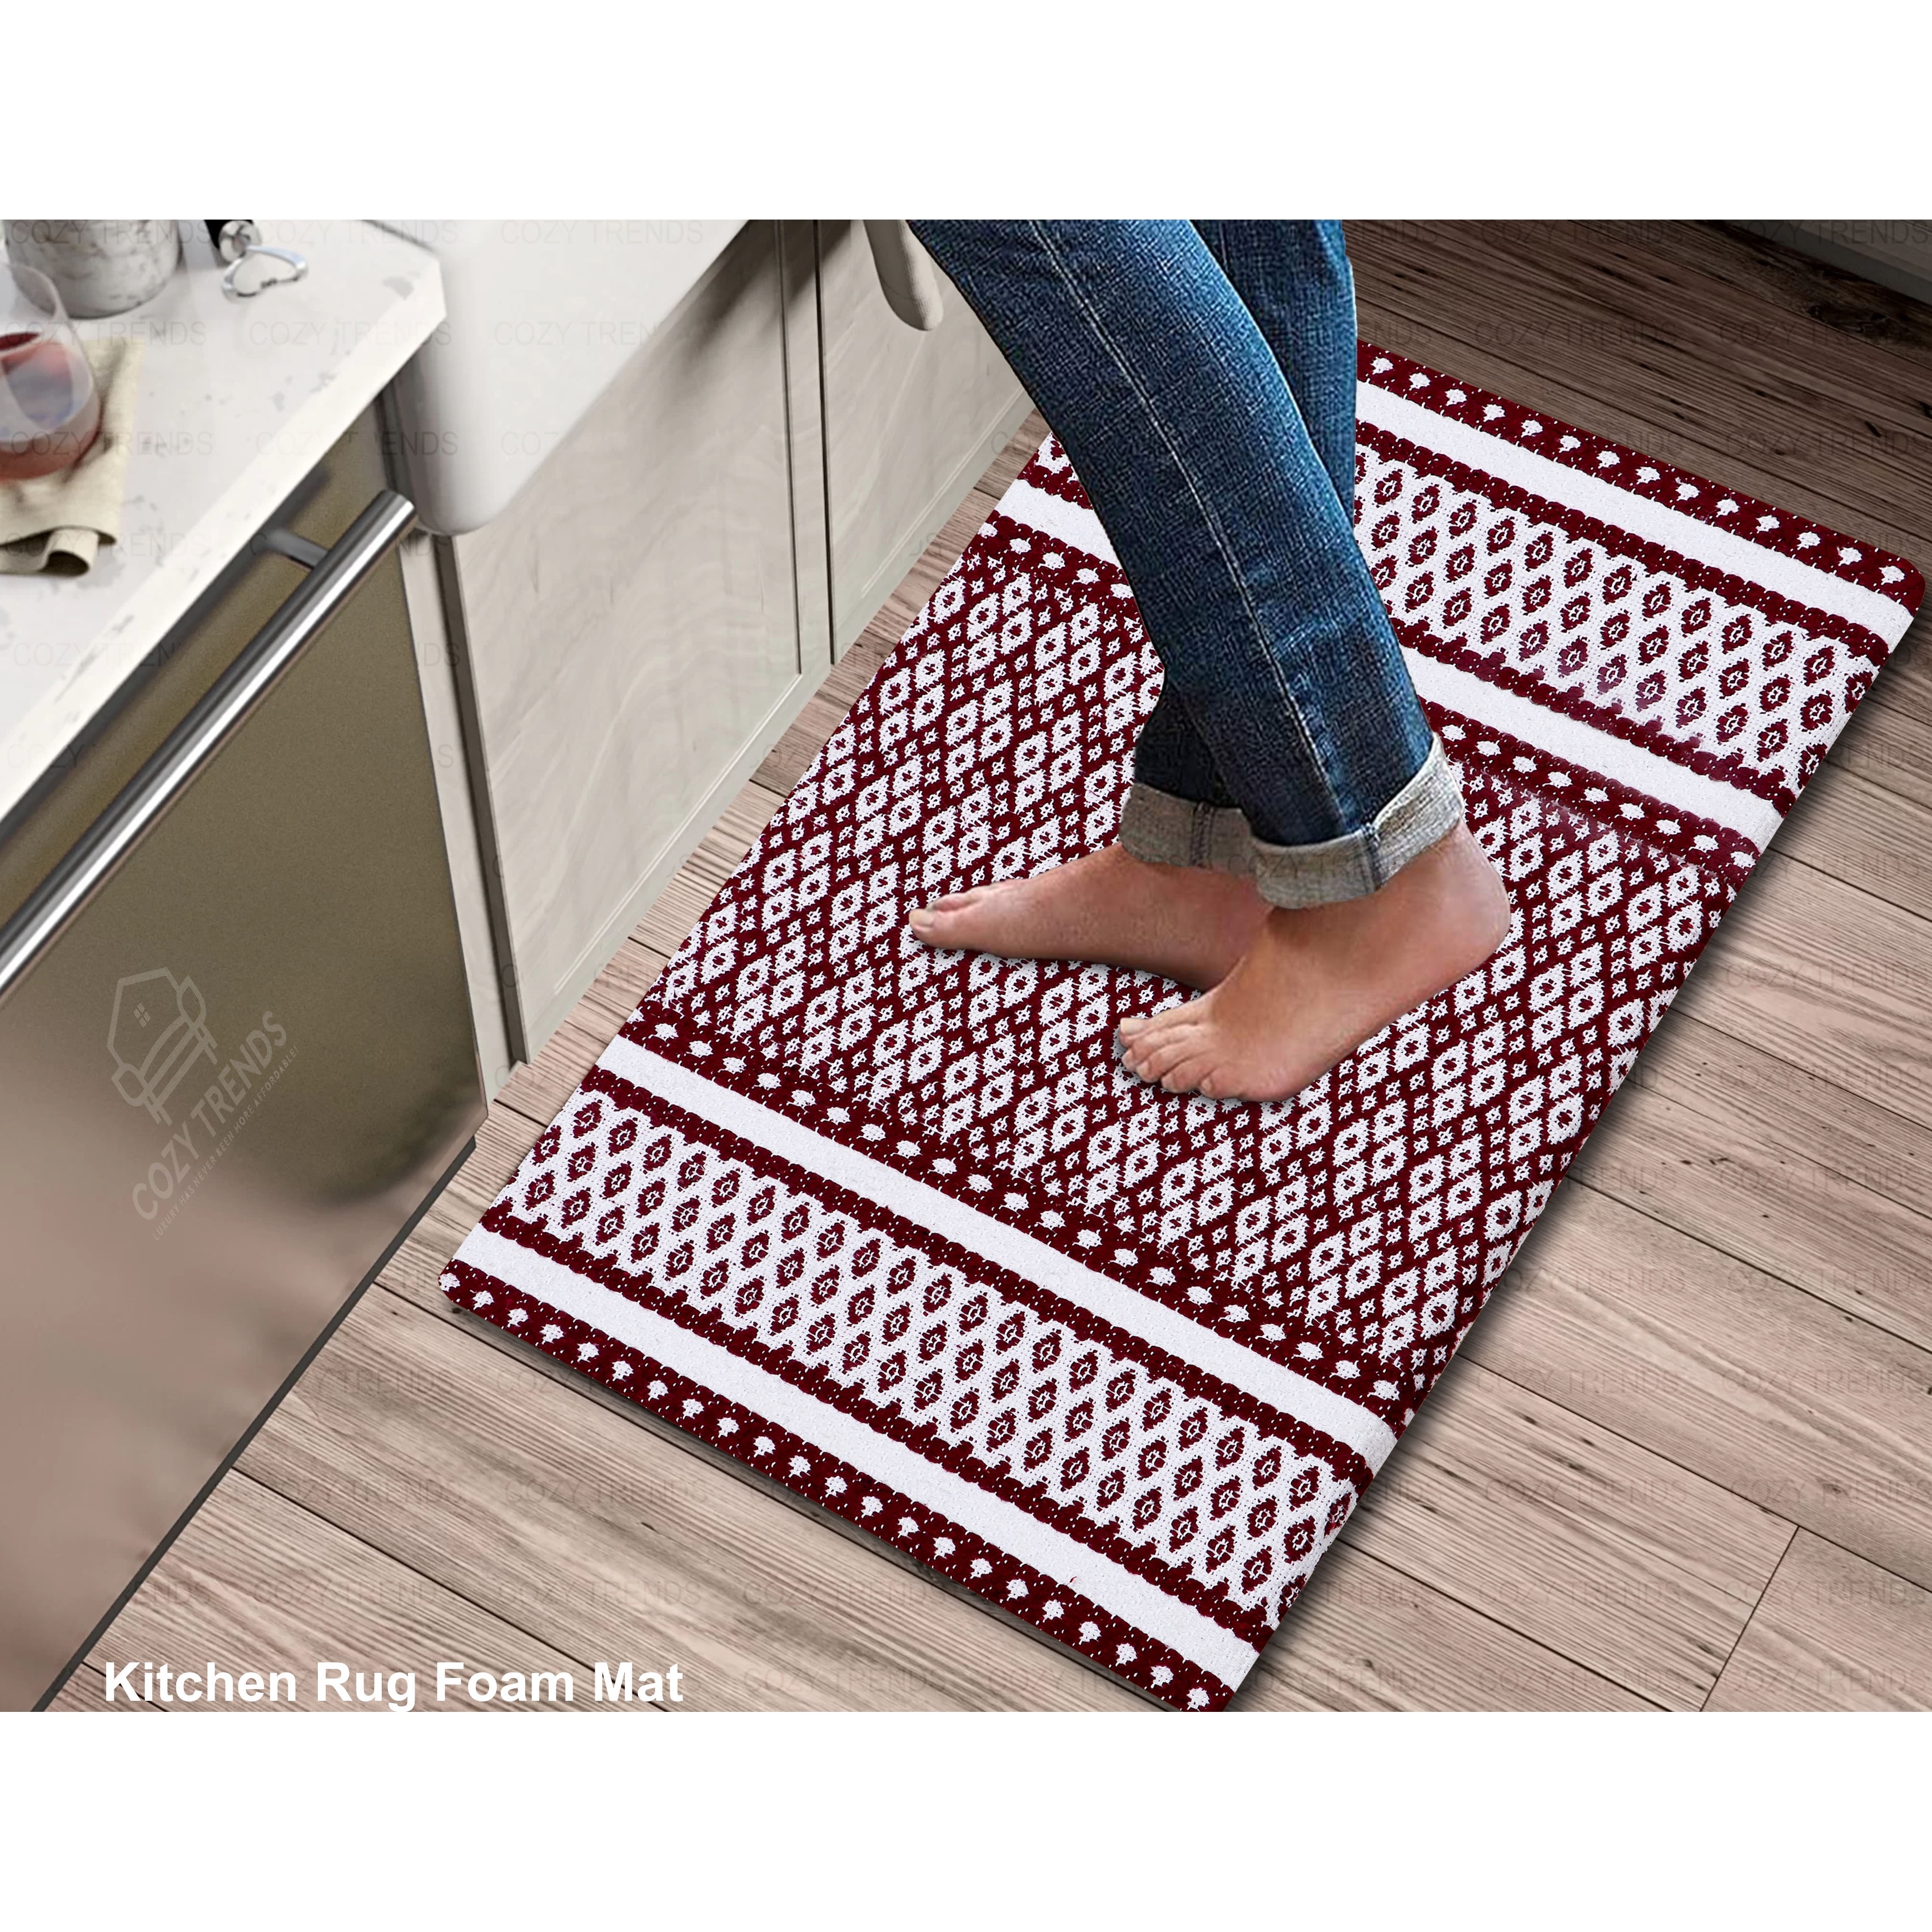 https://ak1.ostkcdn.com/images/products/is/images/direct/f313211141d7188f263ce3aa97e2526f84d670ca/Woven-Cotton-Anti-Fatigue-Cushioned-Kitchen-%7C-Doormat-%7C-Bathroom-18%22-x-30%22-Mats-With-Foam-Backing-Anti-Slip.jpg